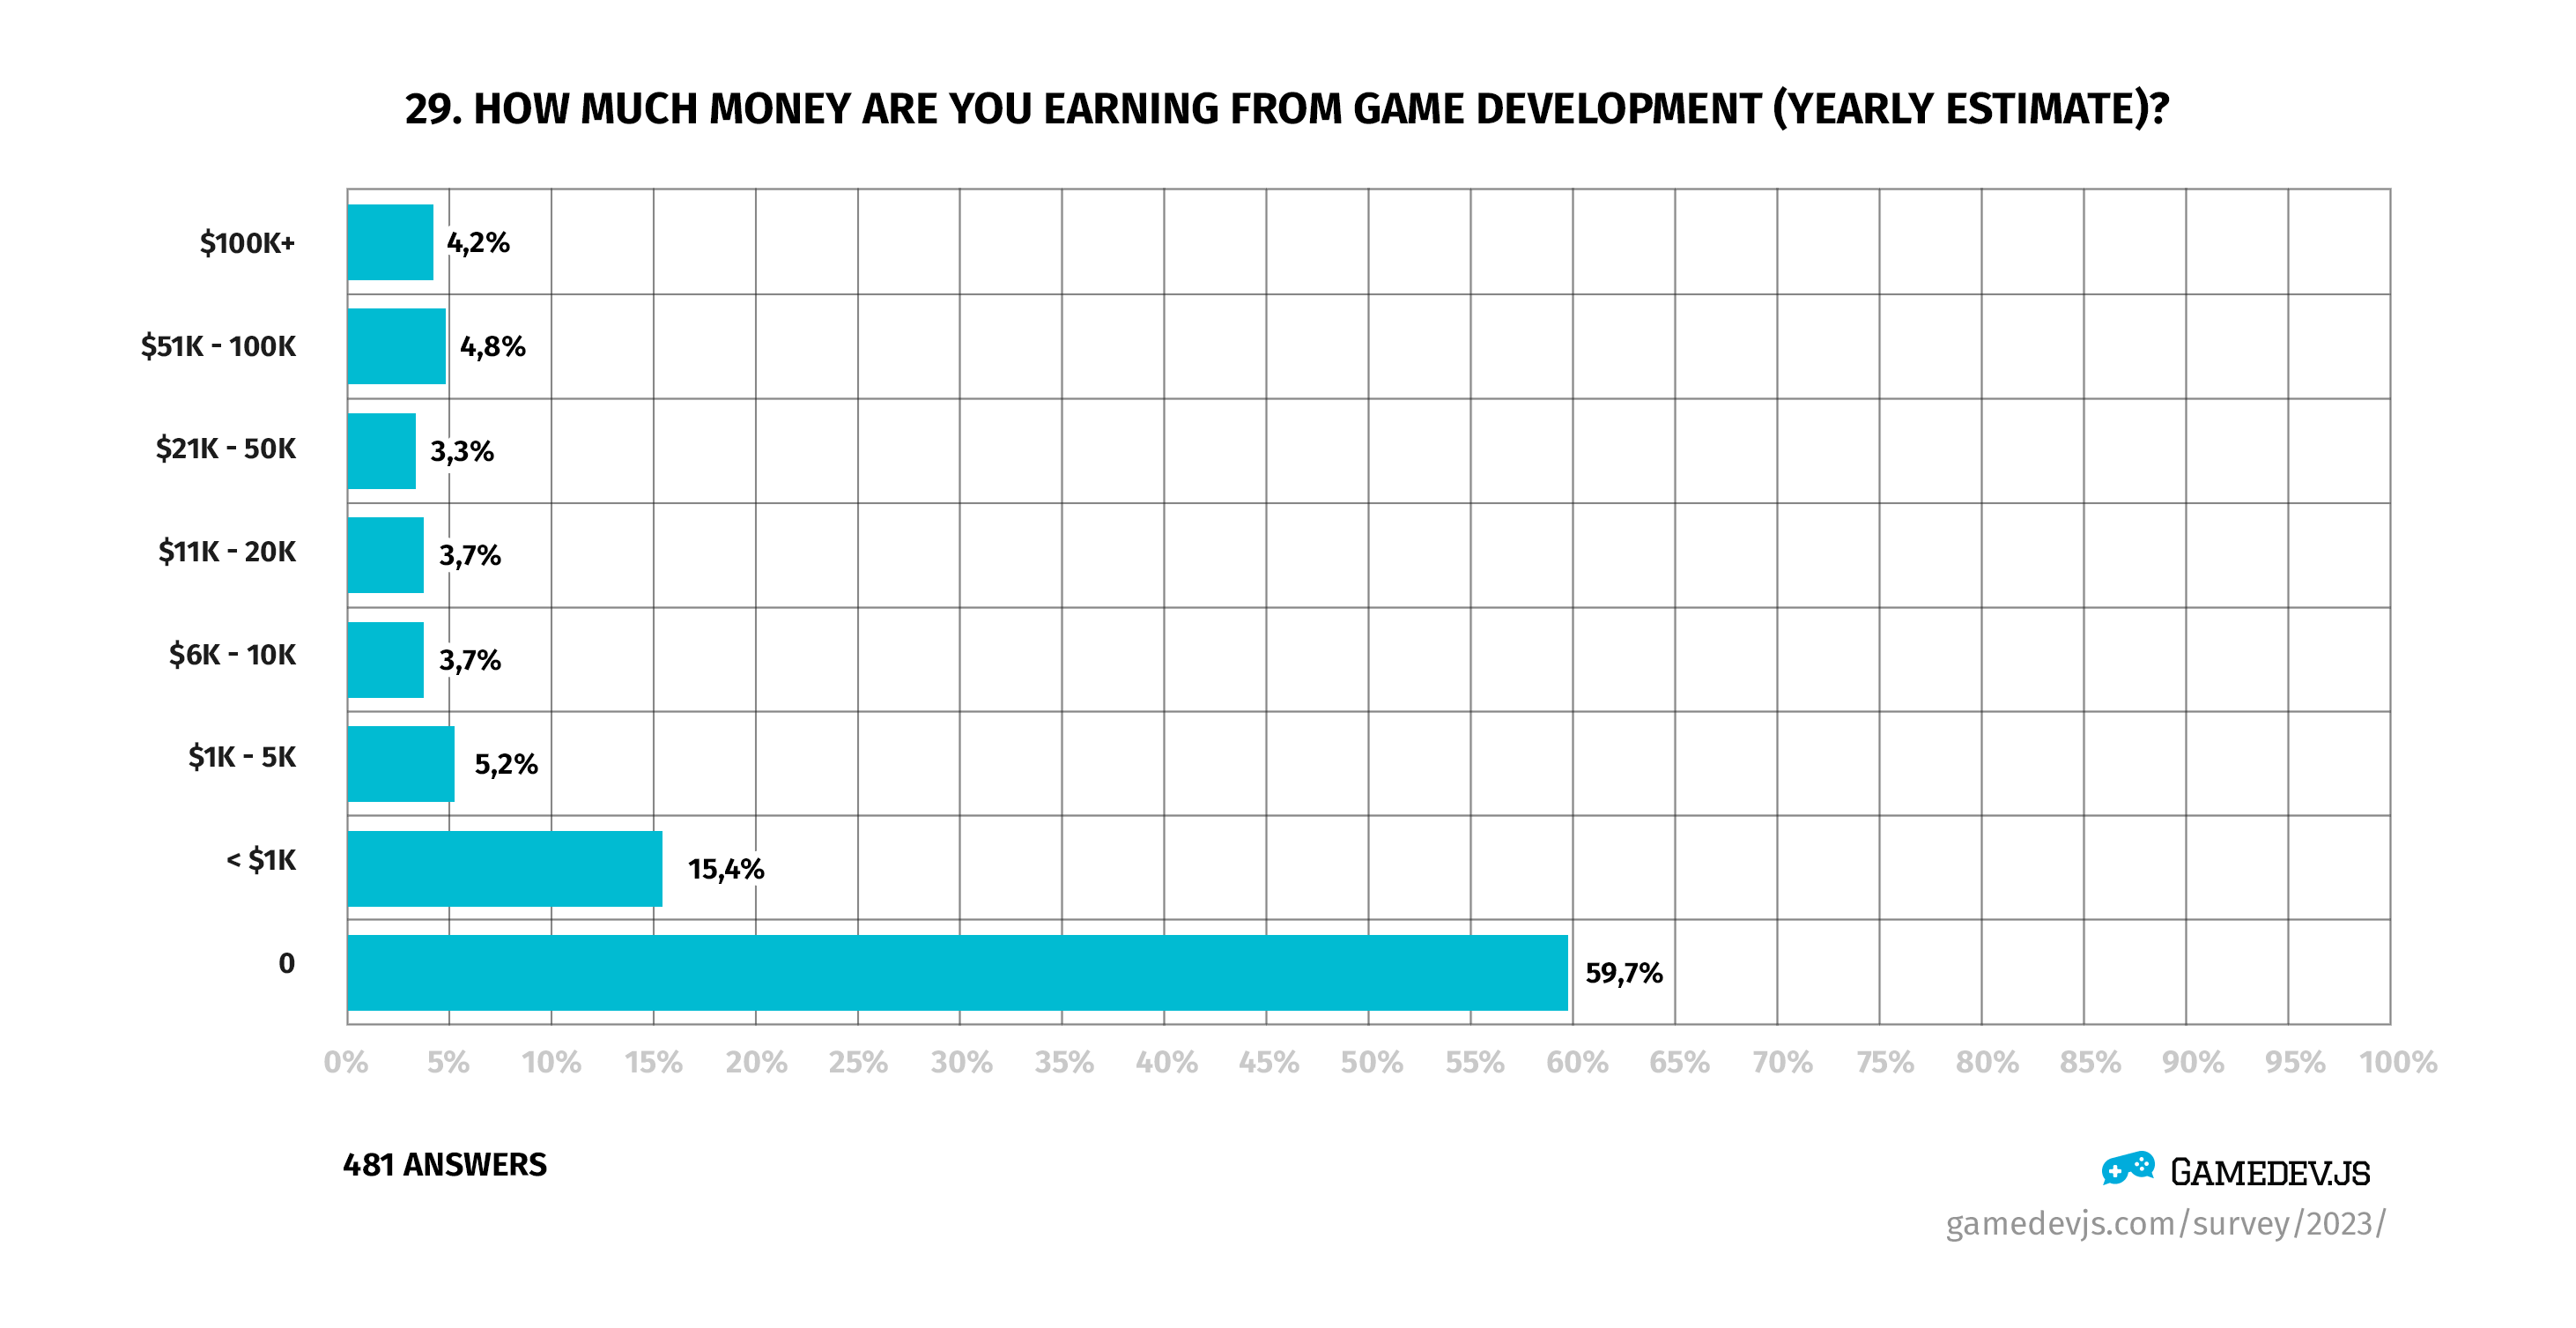 Gamedev.js Survey 2023: How much money are you earning from game development (yearly estimate)?